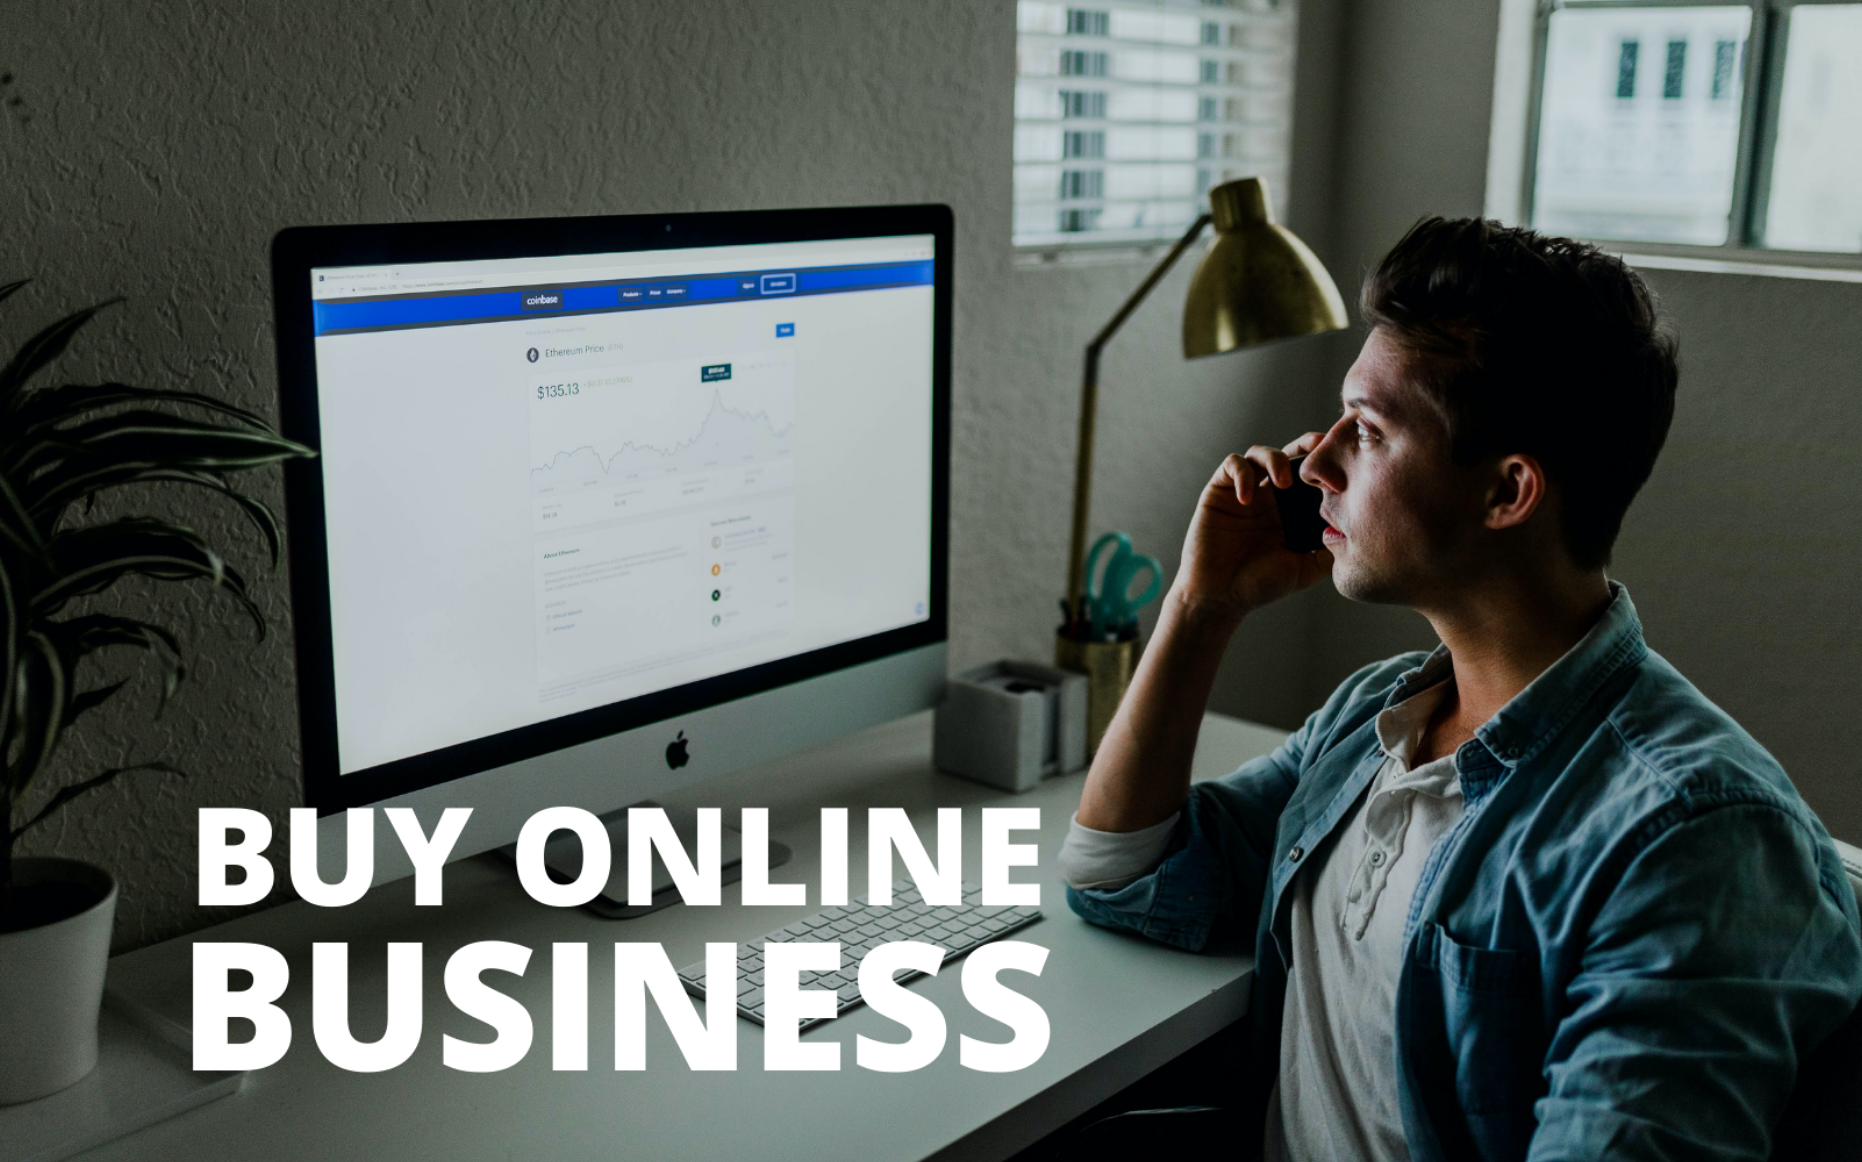 Buy online business, Buy an online business, online business buy and sell, How to buy online business, How to buy an online business